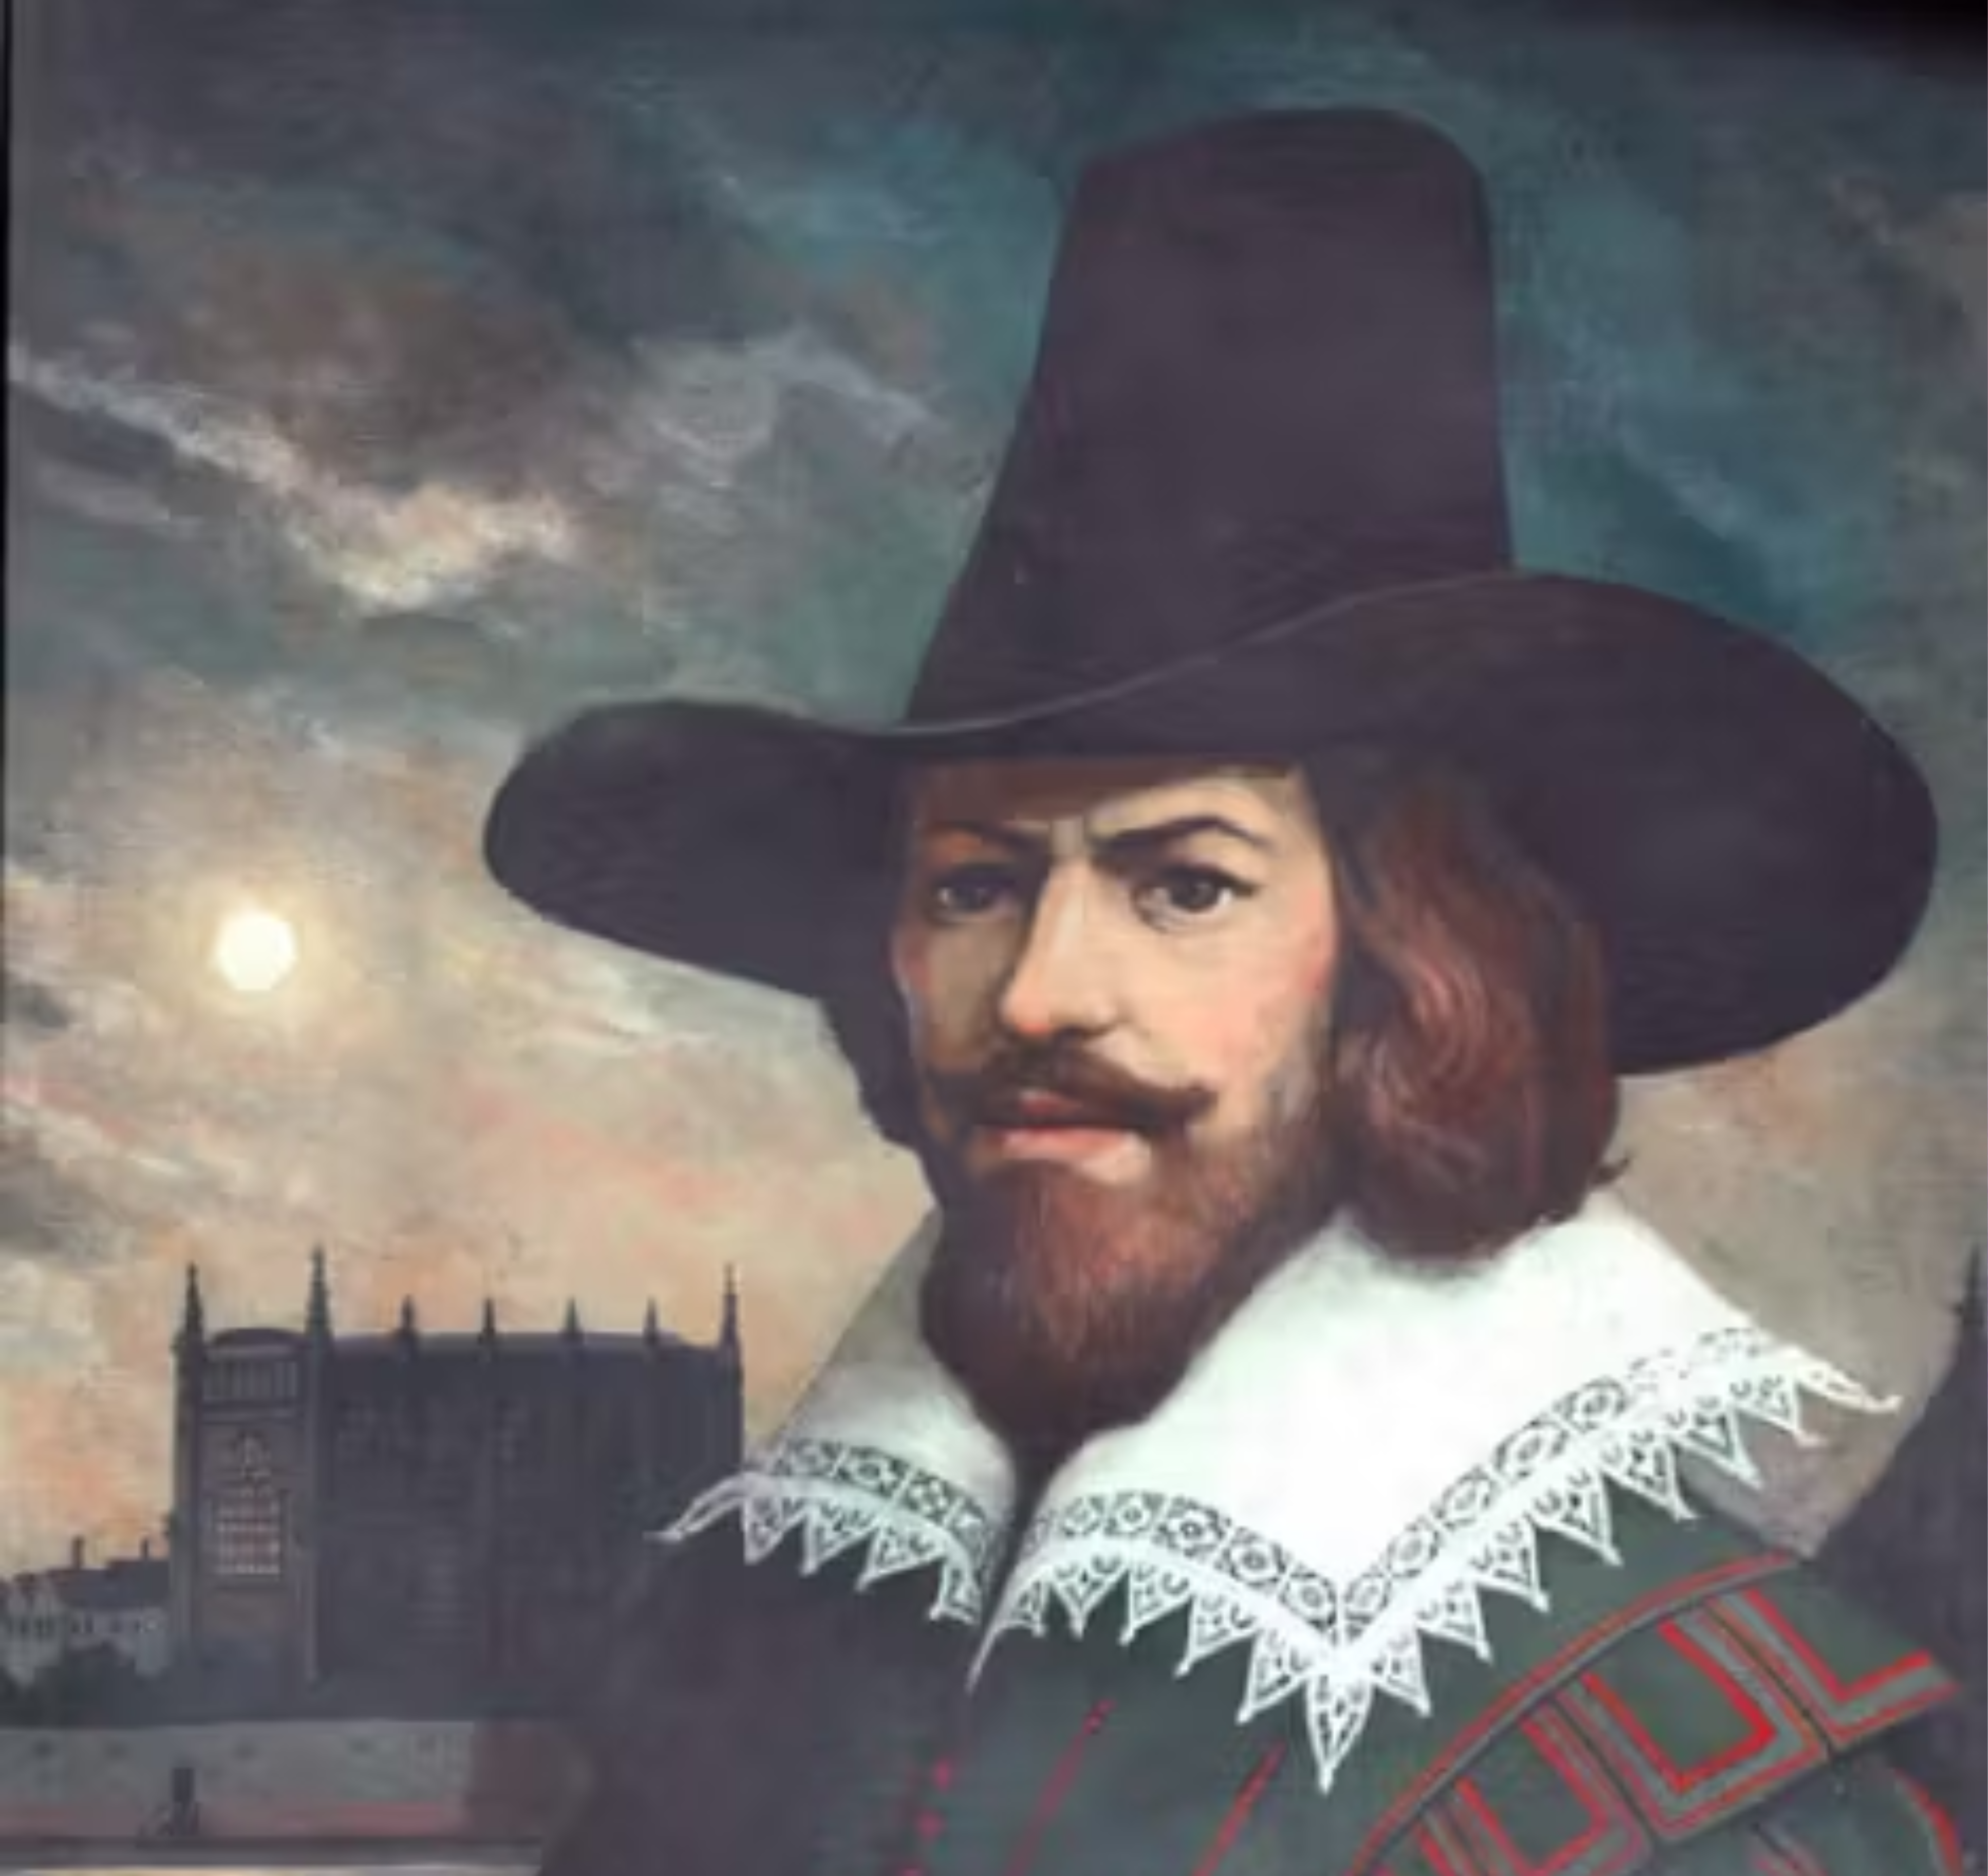 Who was Guy Fawkes?